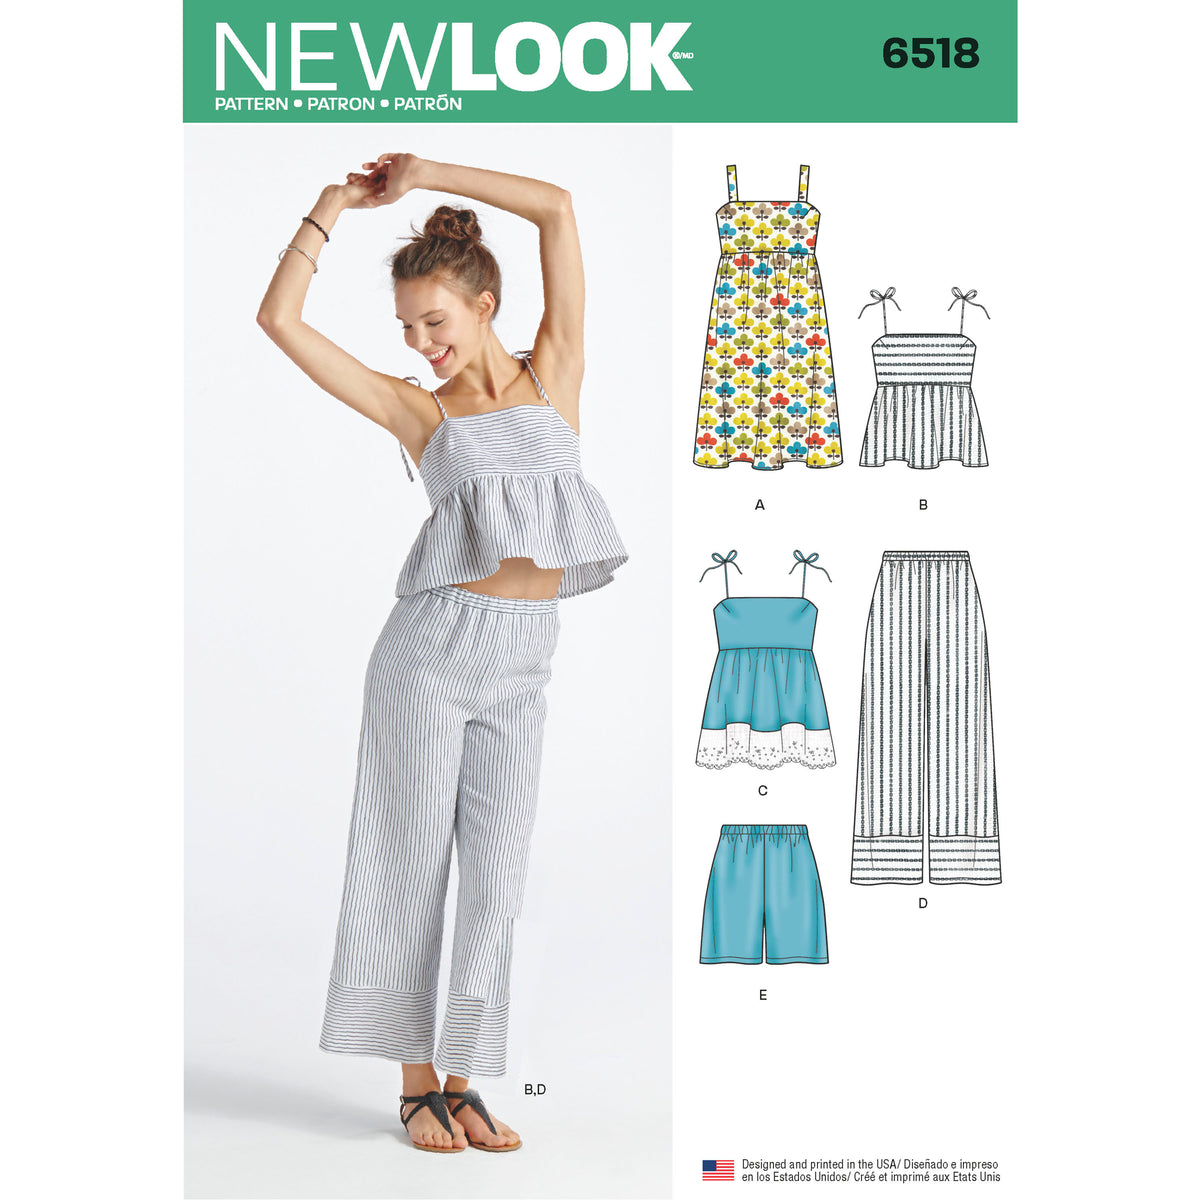 6518 New Look Pattern 6518 Women’s   Dress, Tops in Two Lengths, Pants, and Shorts